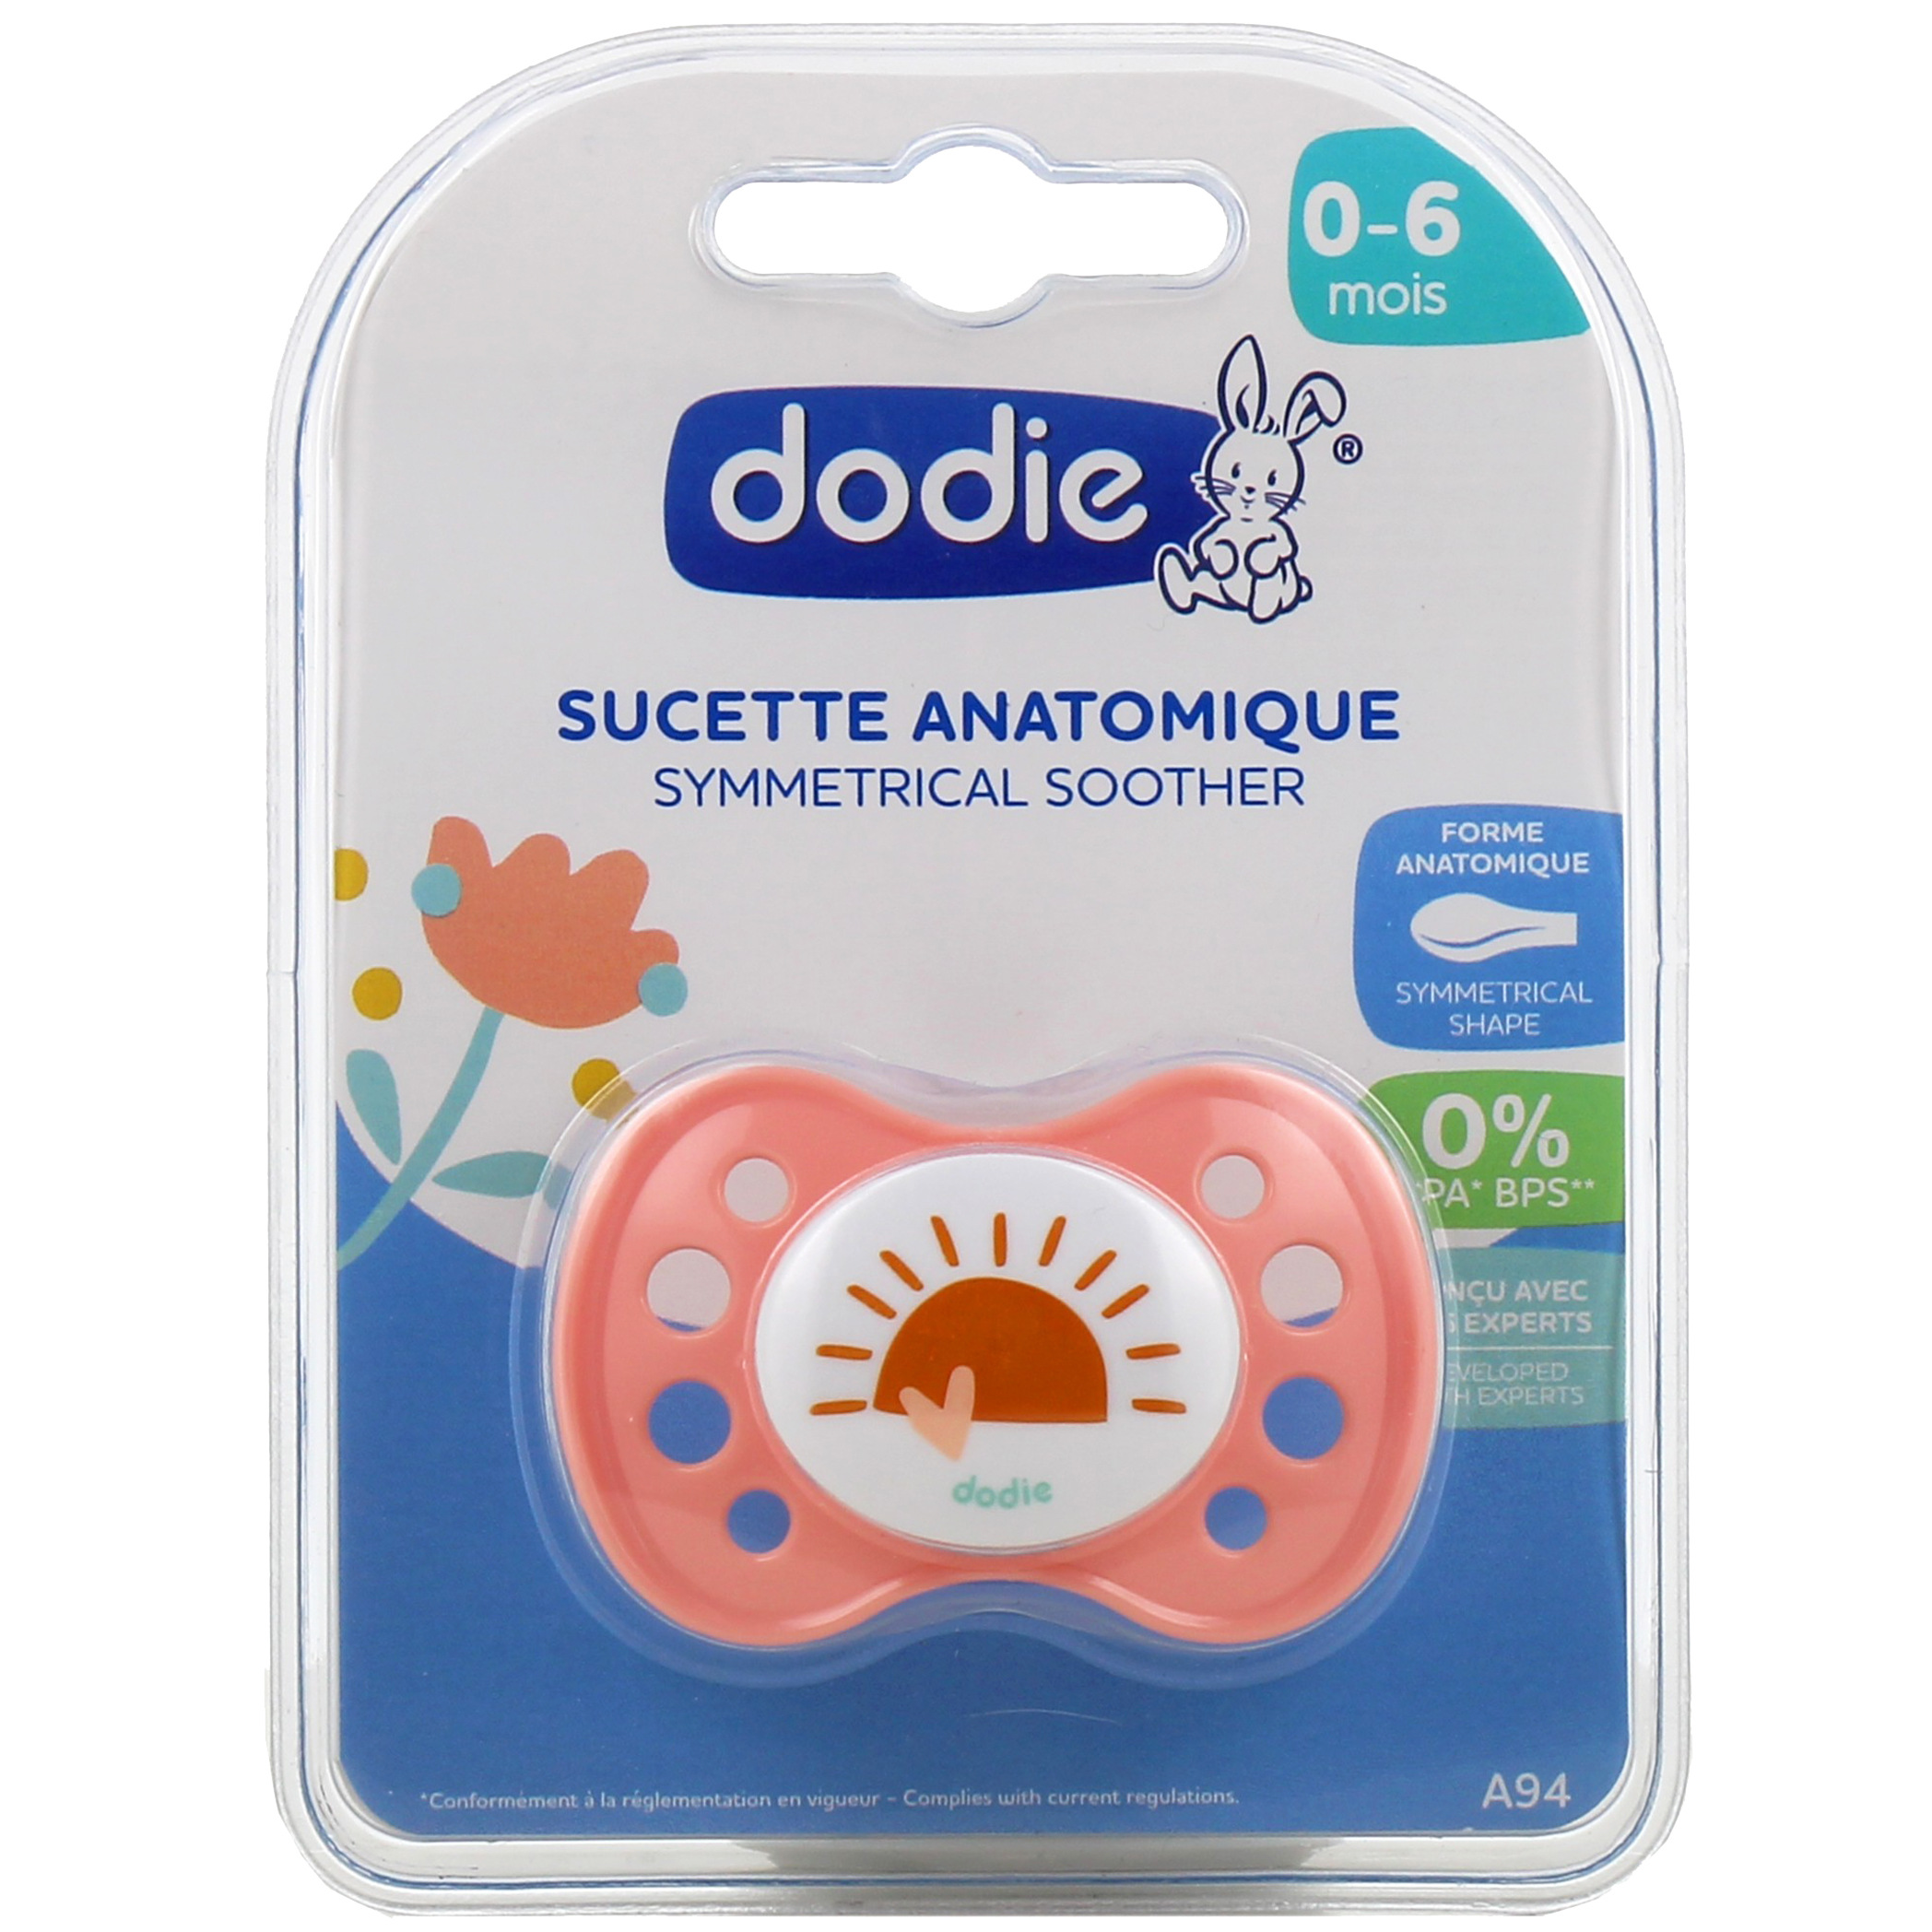 https://cdn.pharmaciedesdrakkars.com/media/images/products/dodie-sucettes-anatomiques-0-6-mois-dodie5-1700142688.jpg